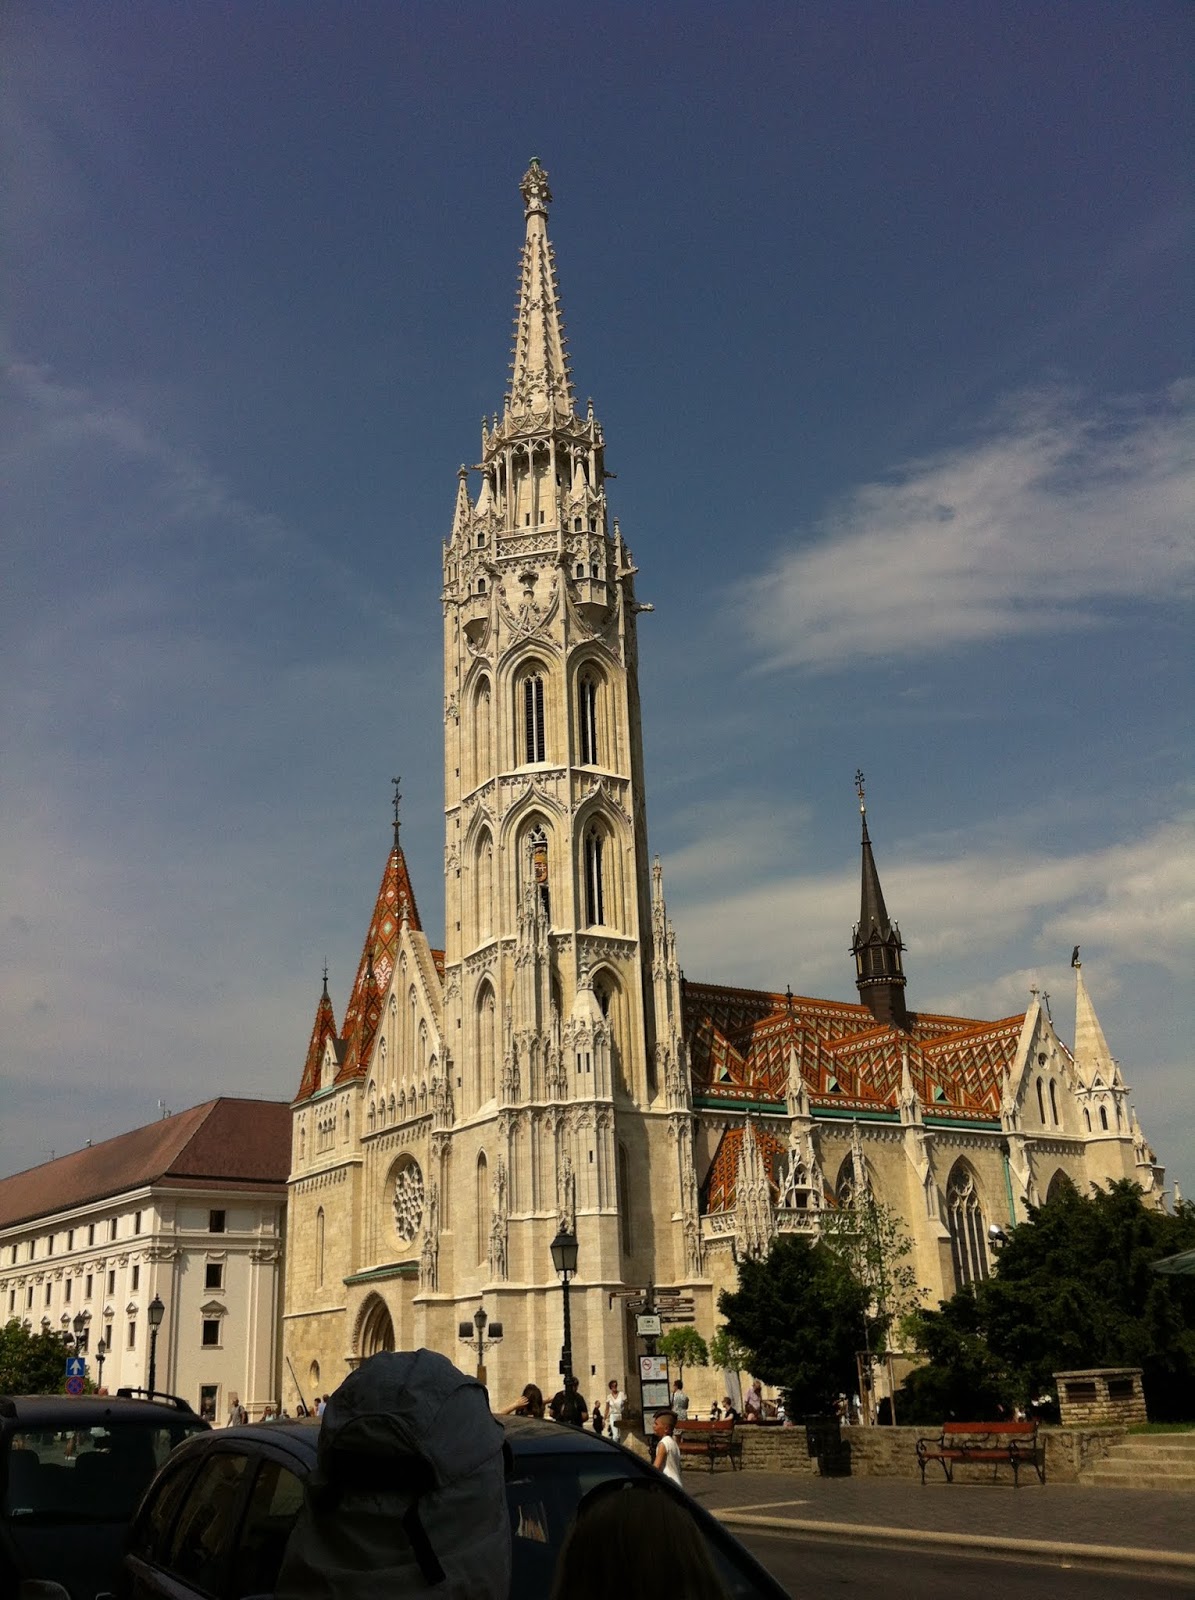 A famous church in Budapest